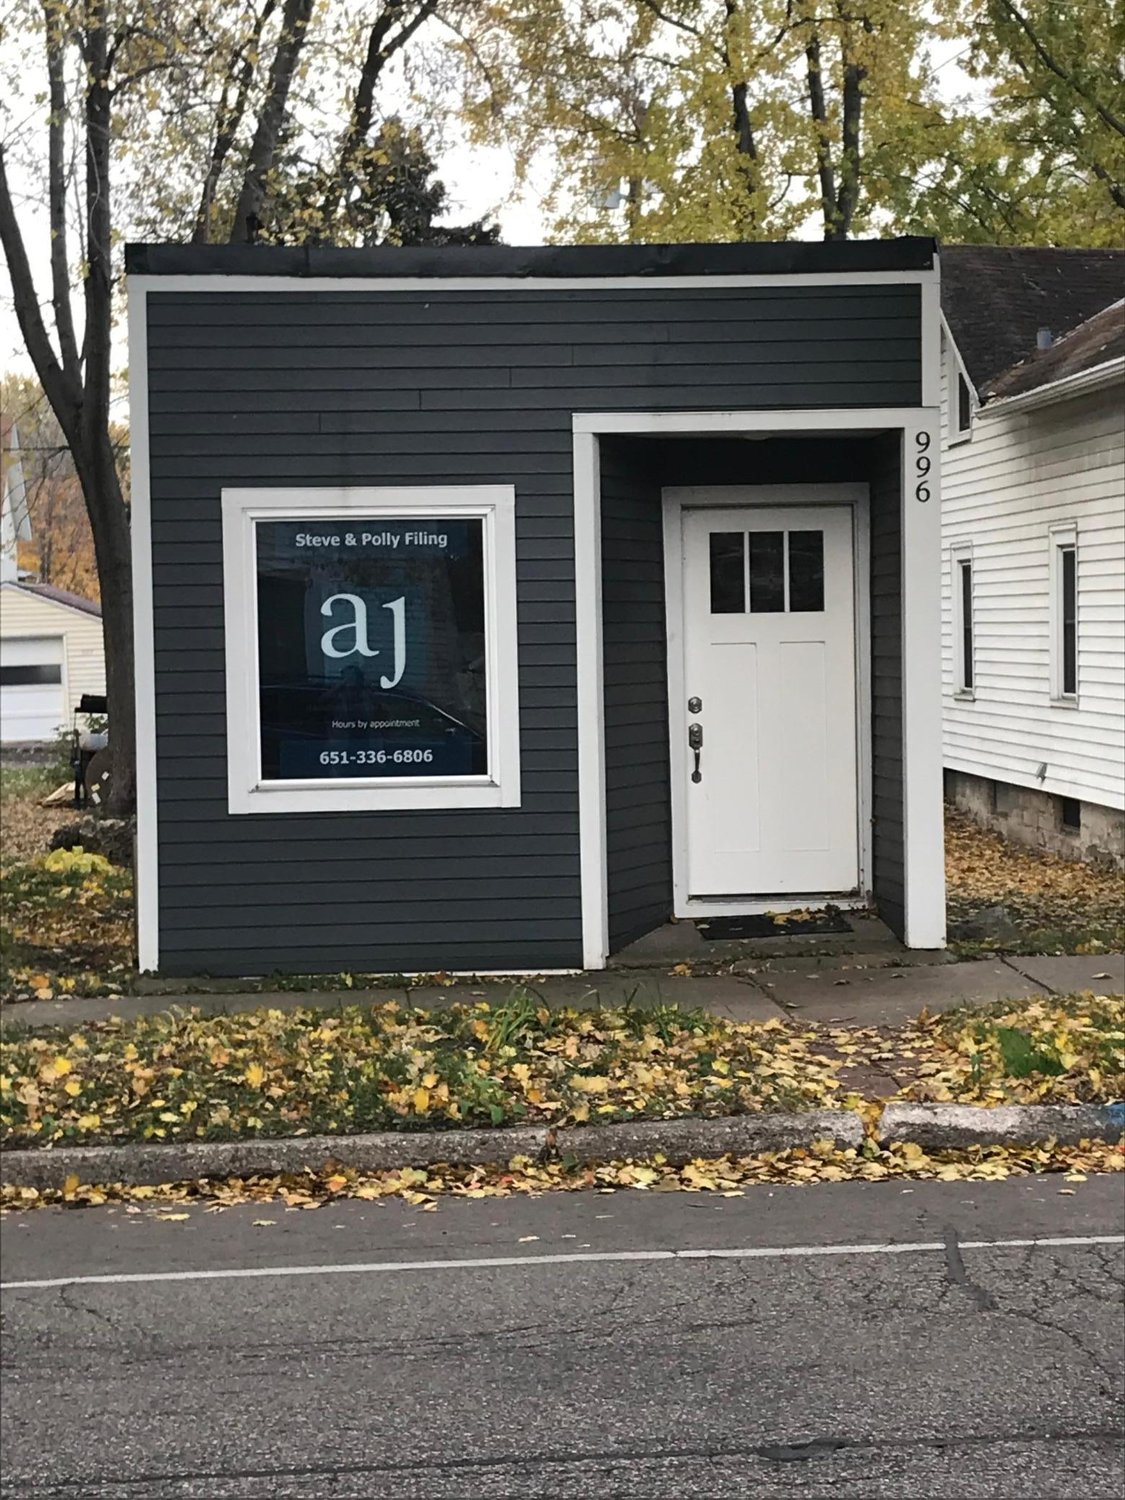 At 576 square feet, this office space at 996 Front Ave. is considered a small working space. “I just believe, whether it’s for business or personal, you don’t need as much space,” said building owner Stephen Filing of Realty Group.